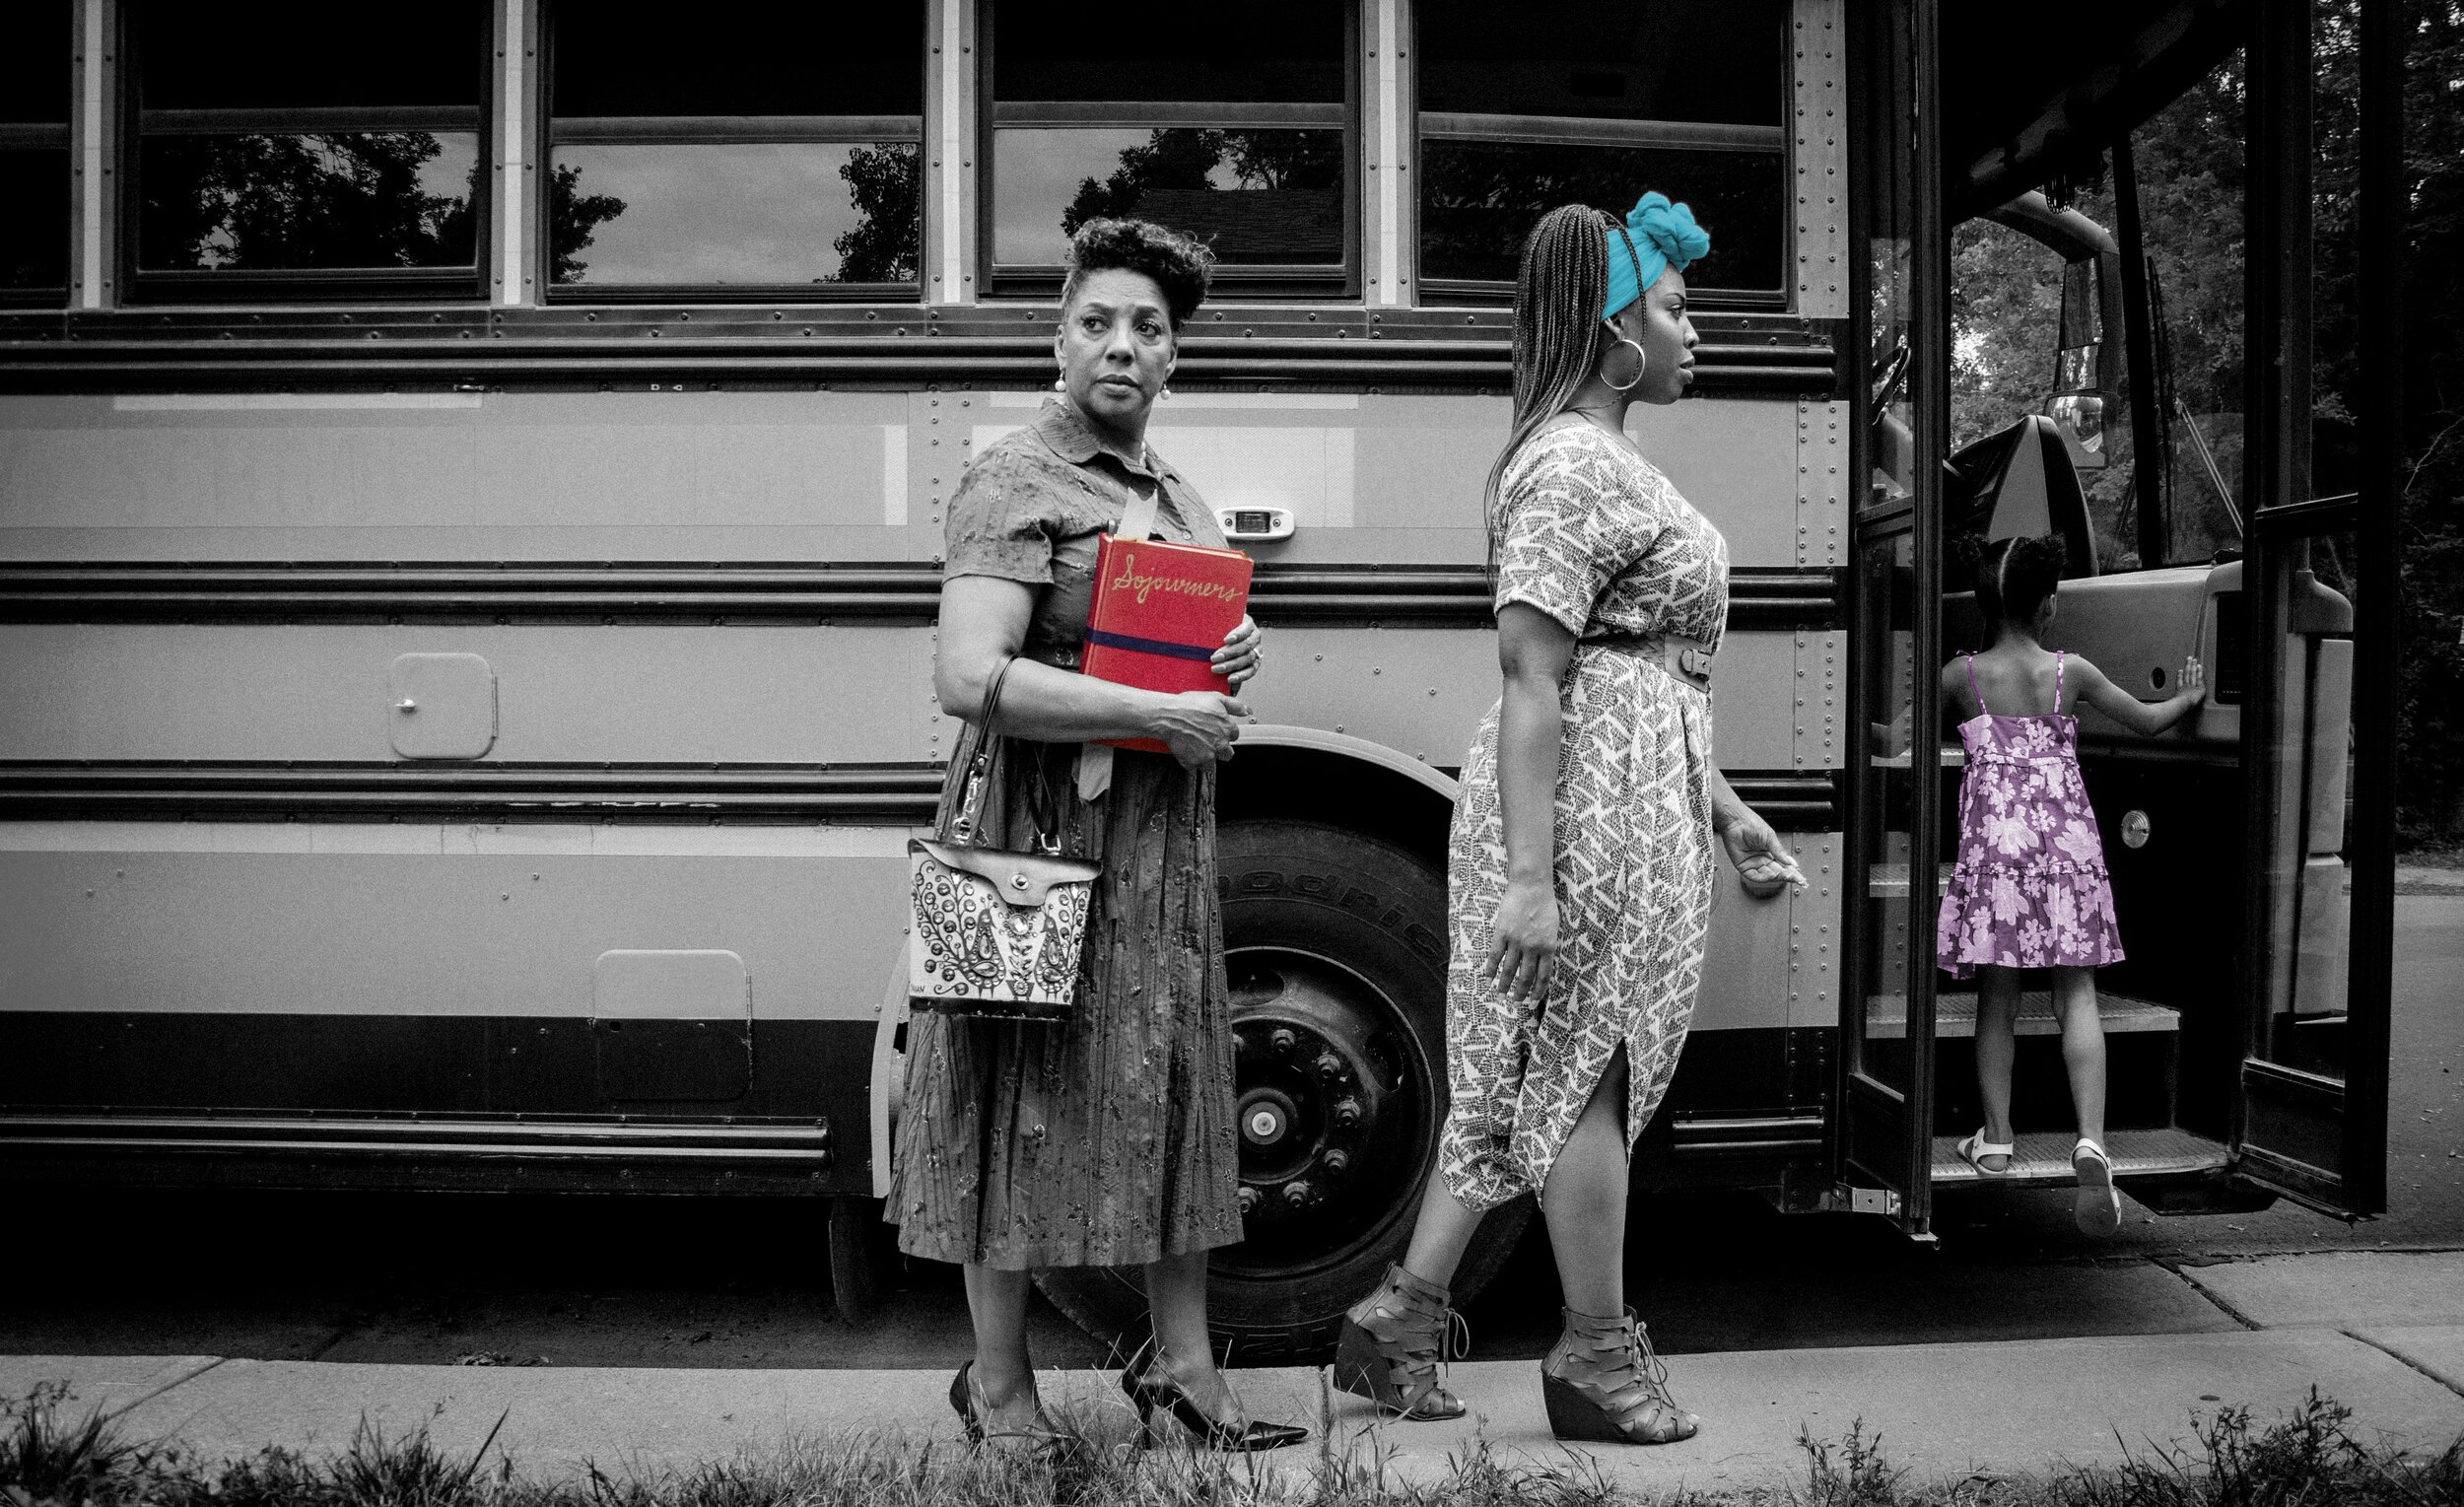 Sojourners Project: Busing